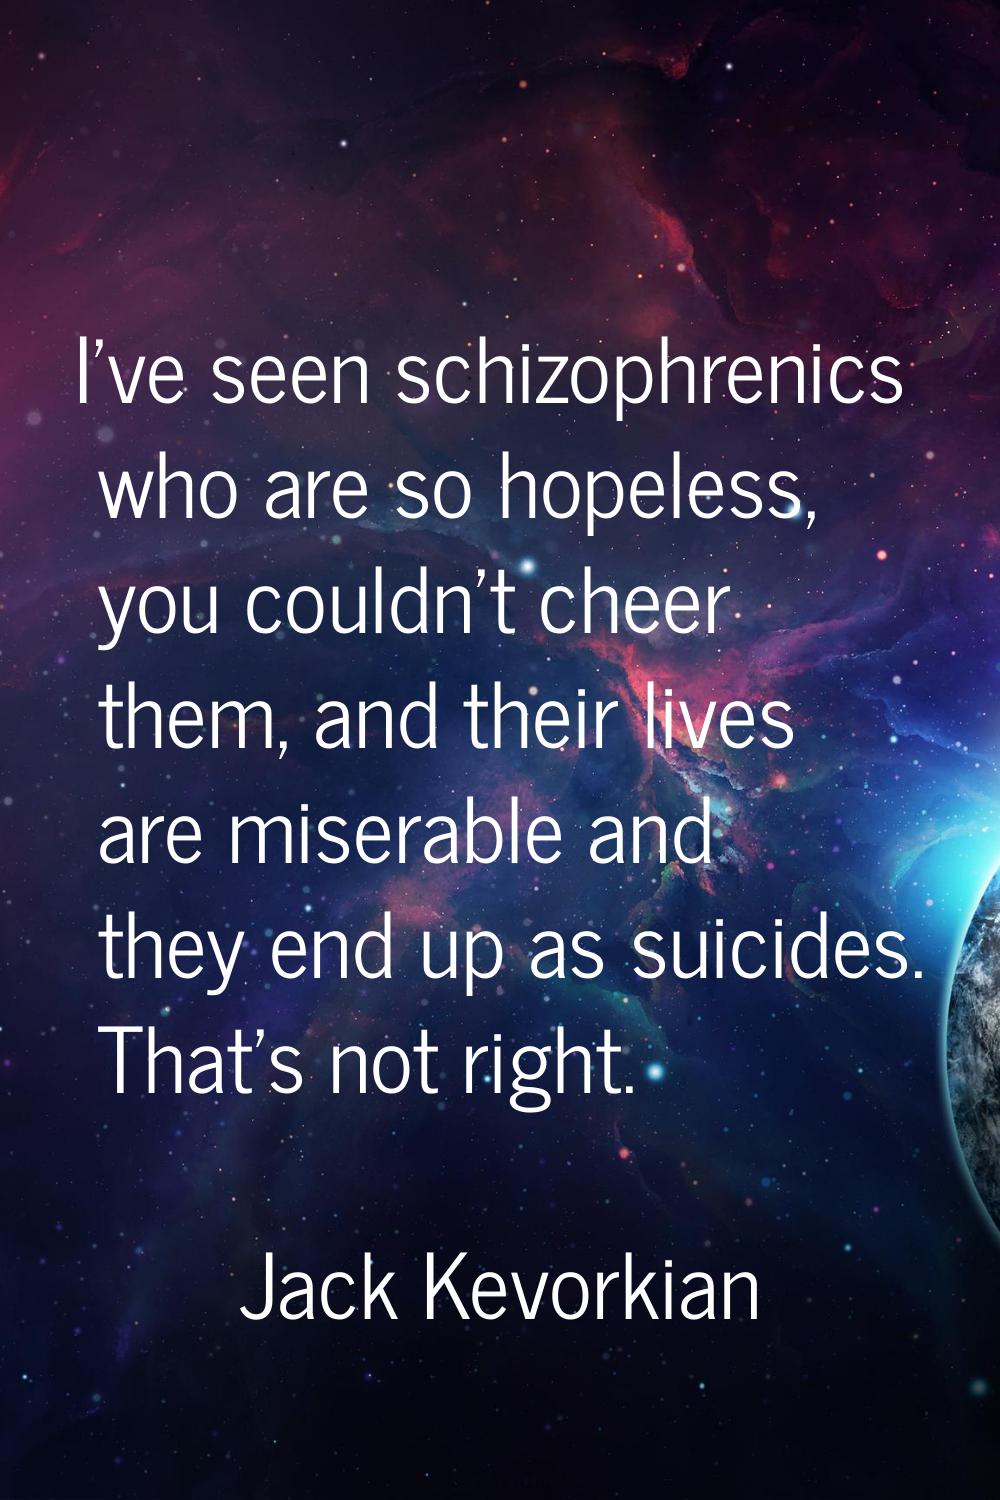 I've seen schizophrenics who are so hopeless, you couldn't cheer them, and their lives are miserabl